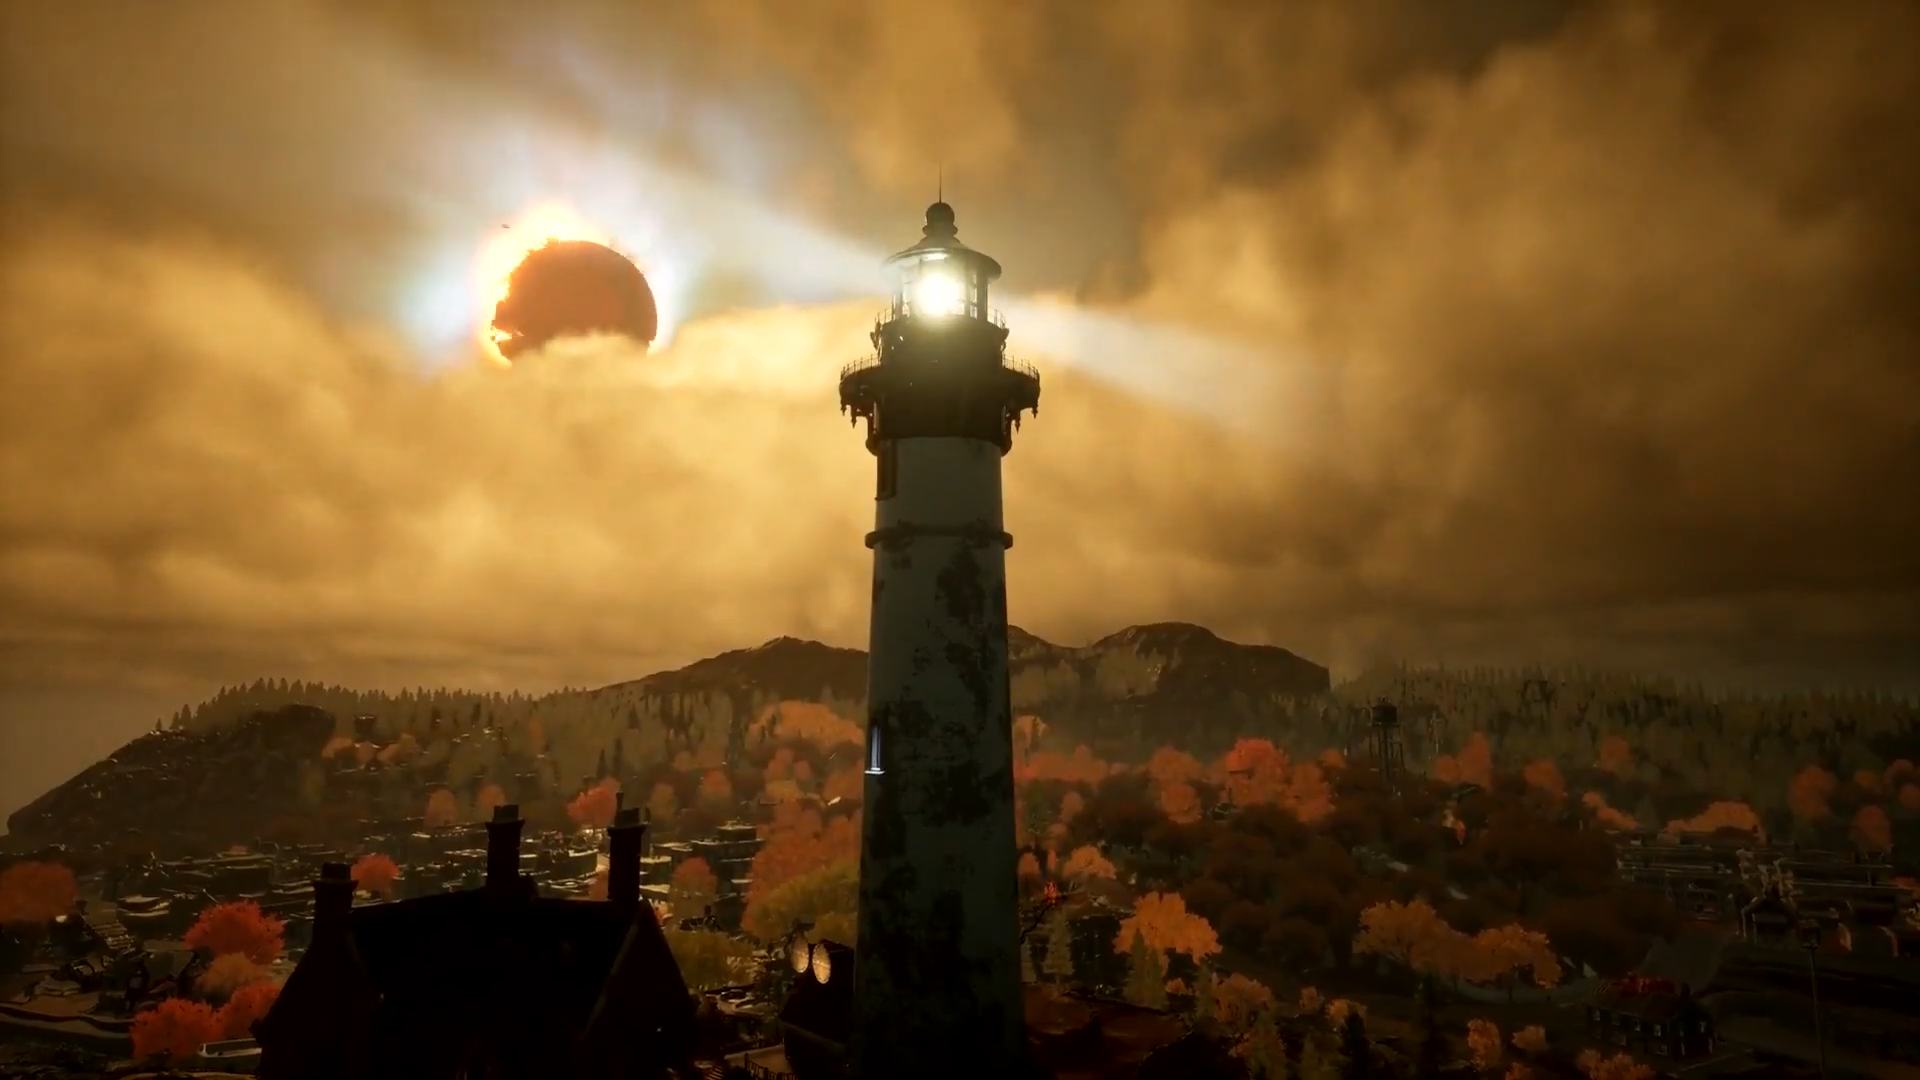 A lighthouse shining its light over the quaint town of Redfall